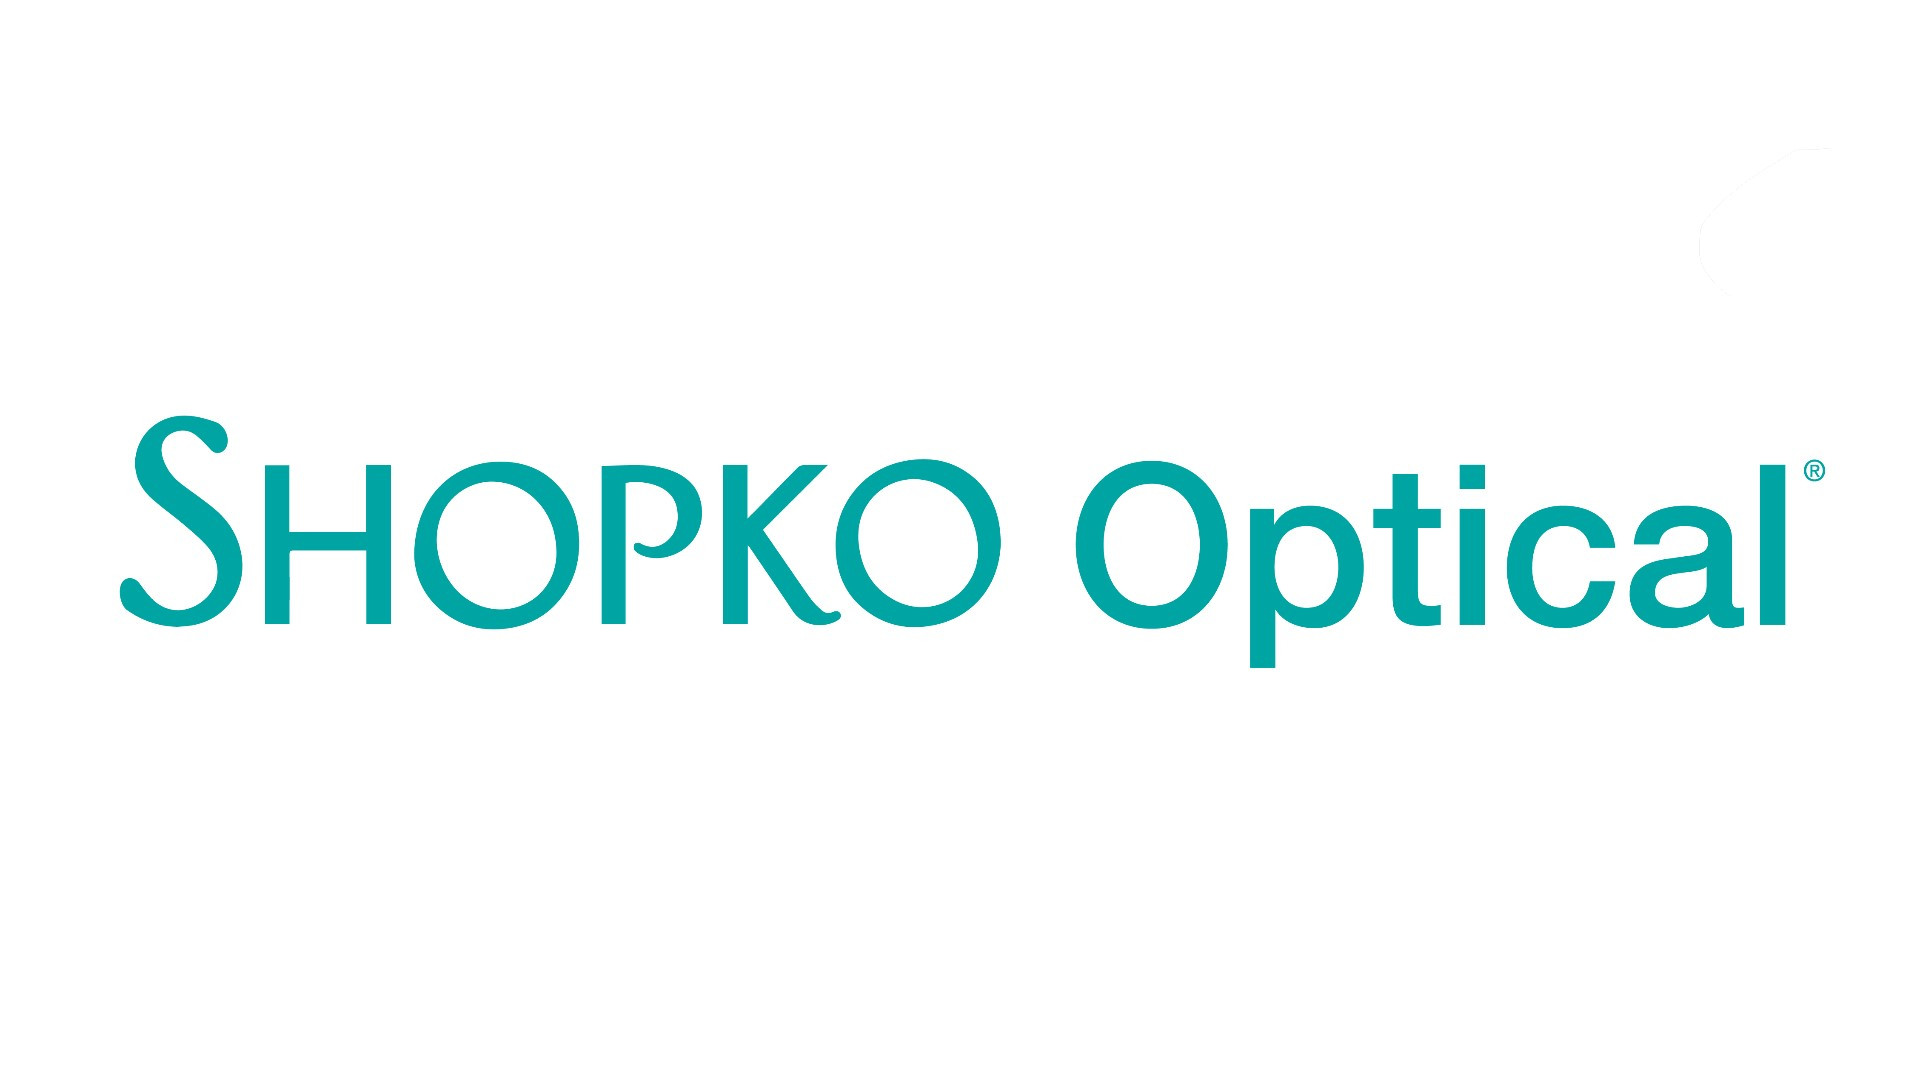 The Shopko Optical Story…Authentic Confidence in Action